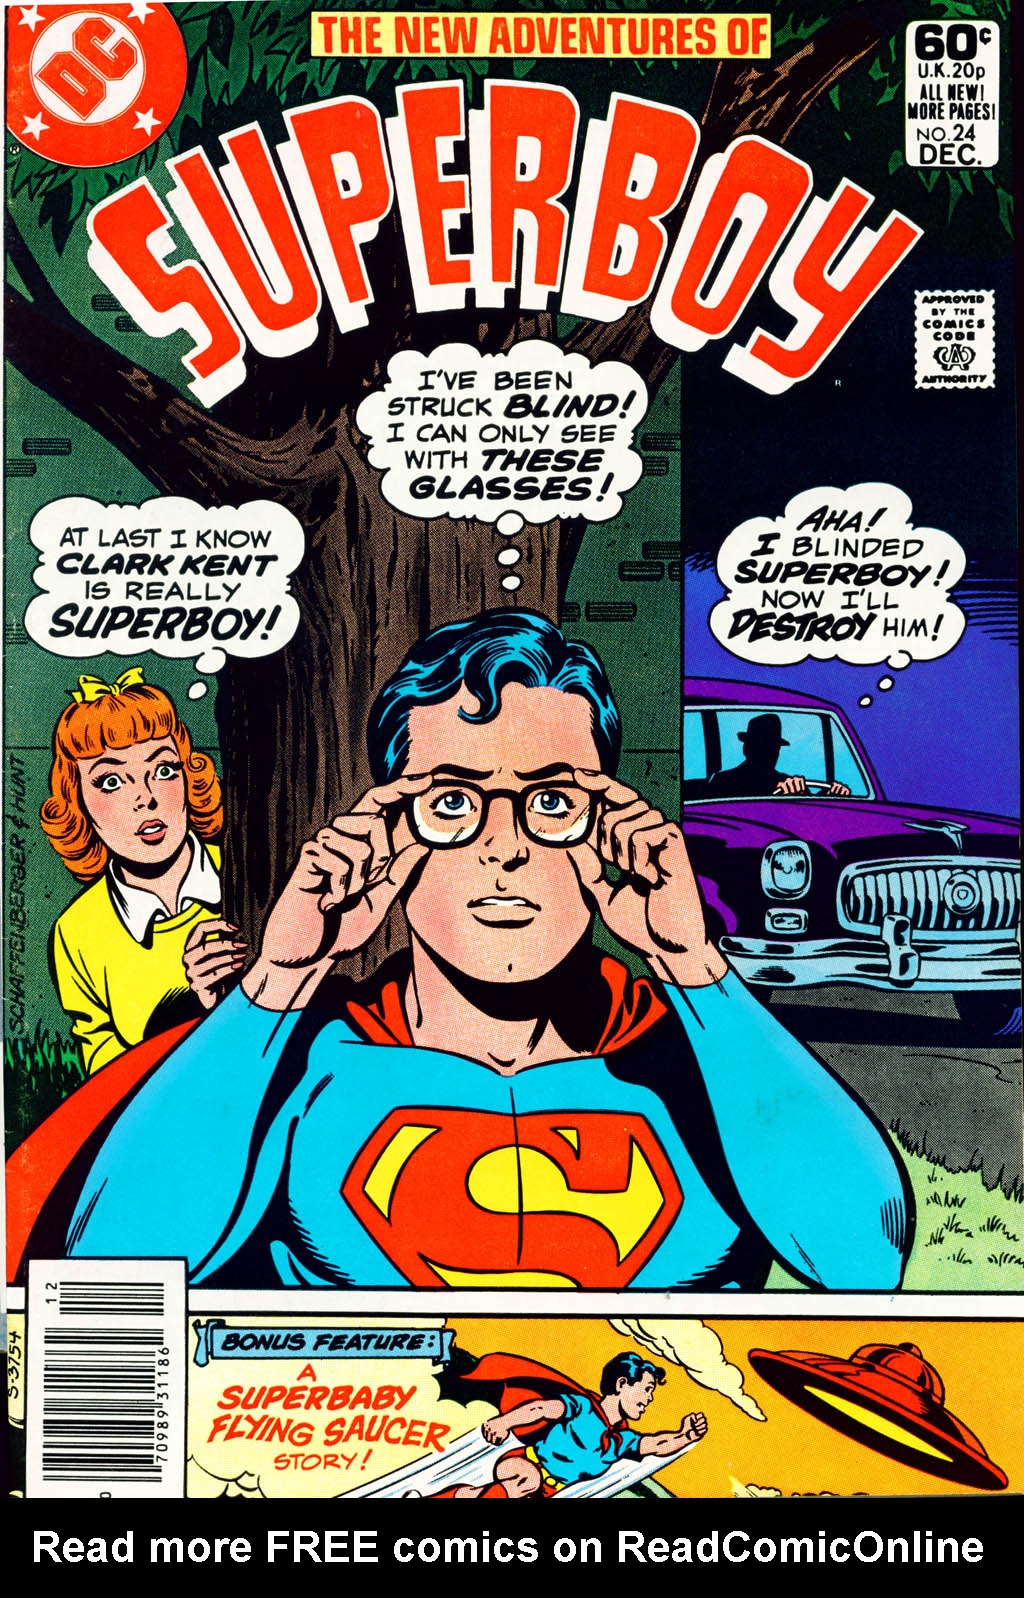 Read online The New Adventures of Superboy comic -  Issue #24 - 1